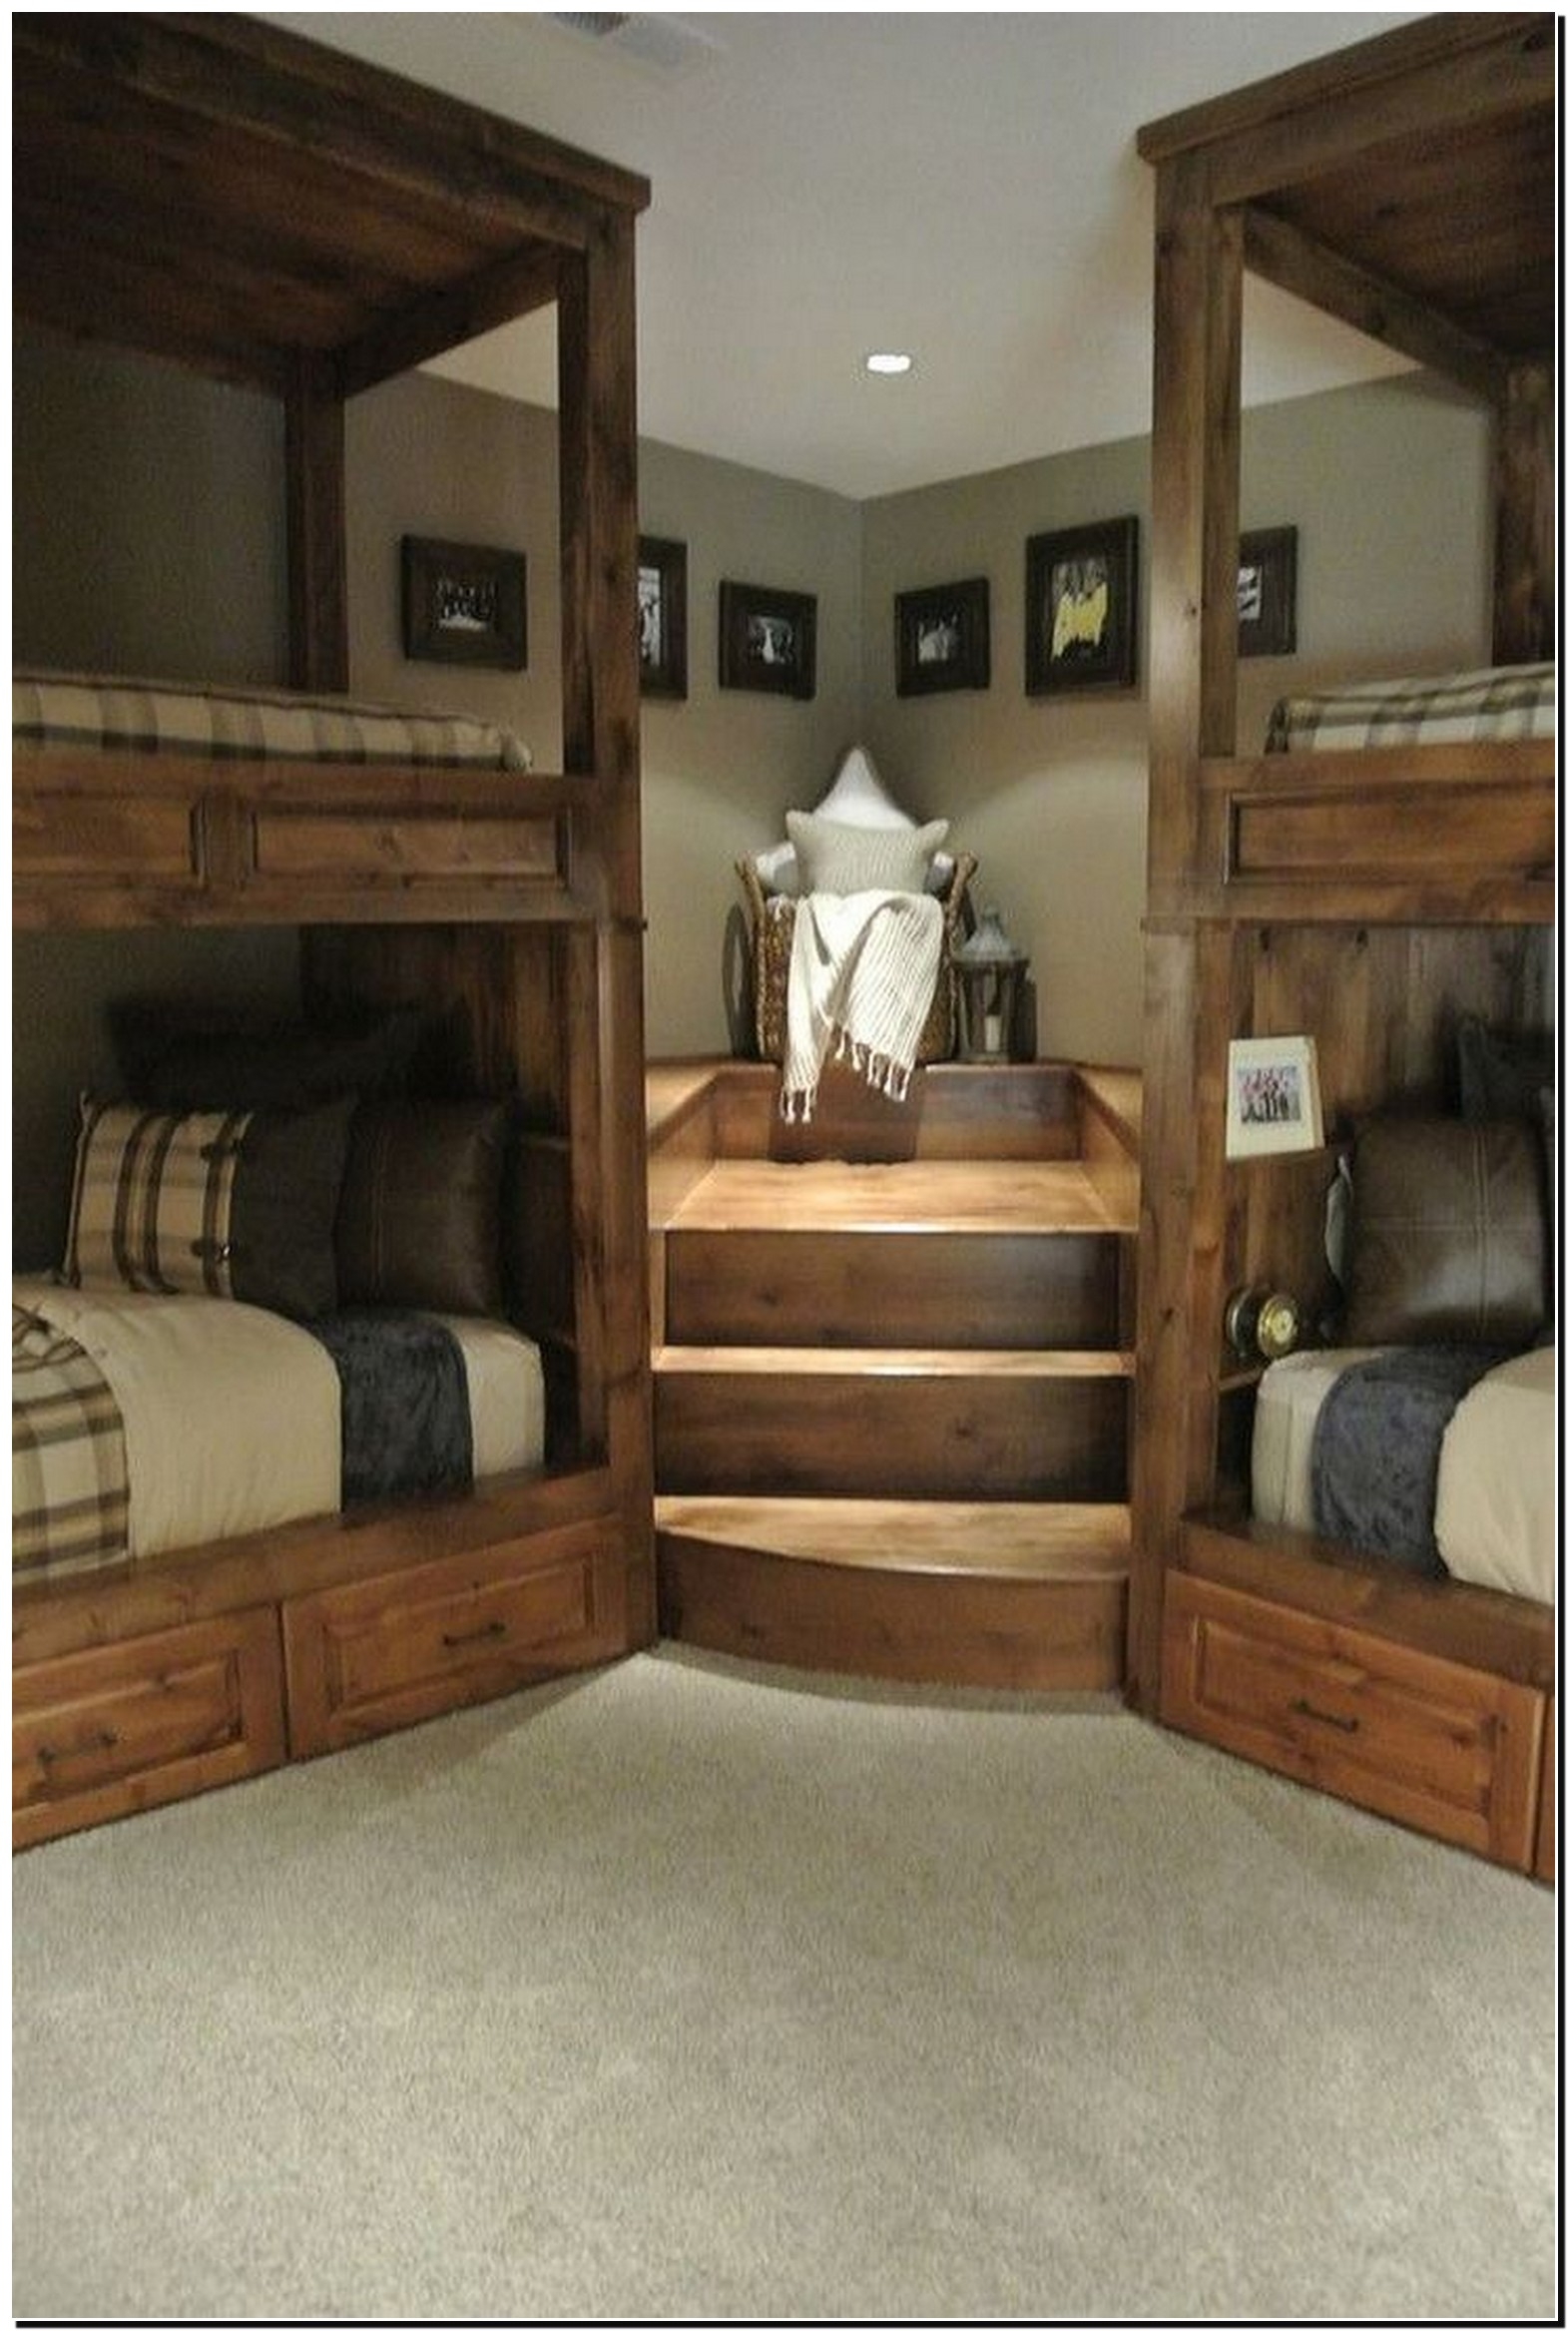 Rustic Bunk Beds Ideas On Foter